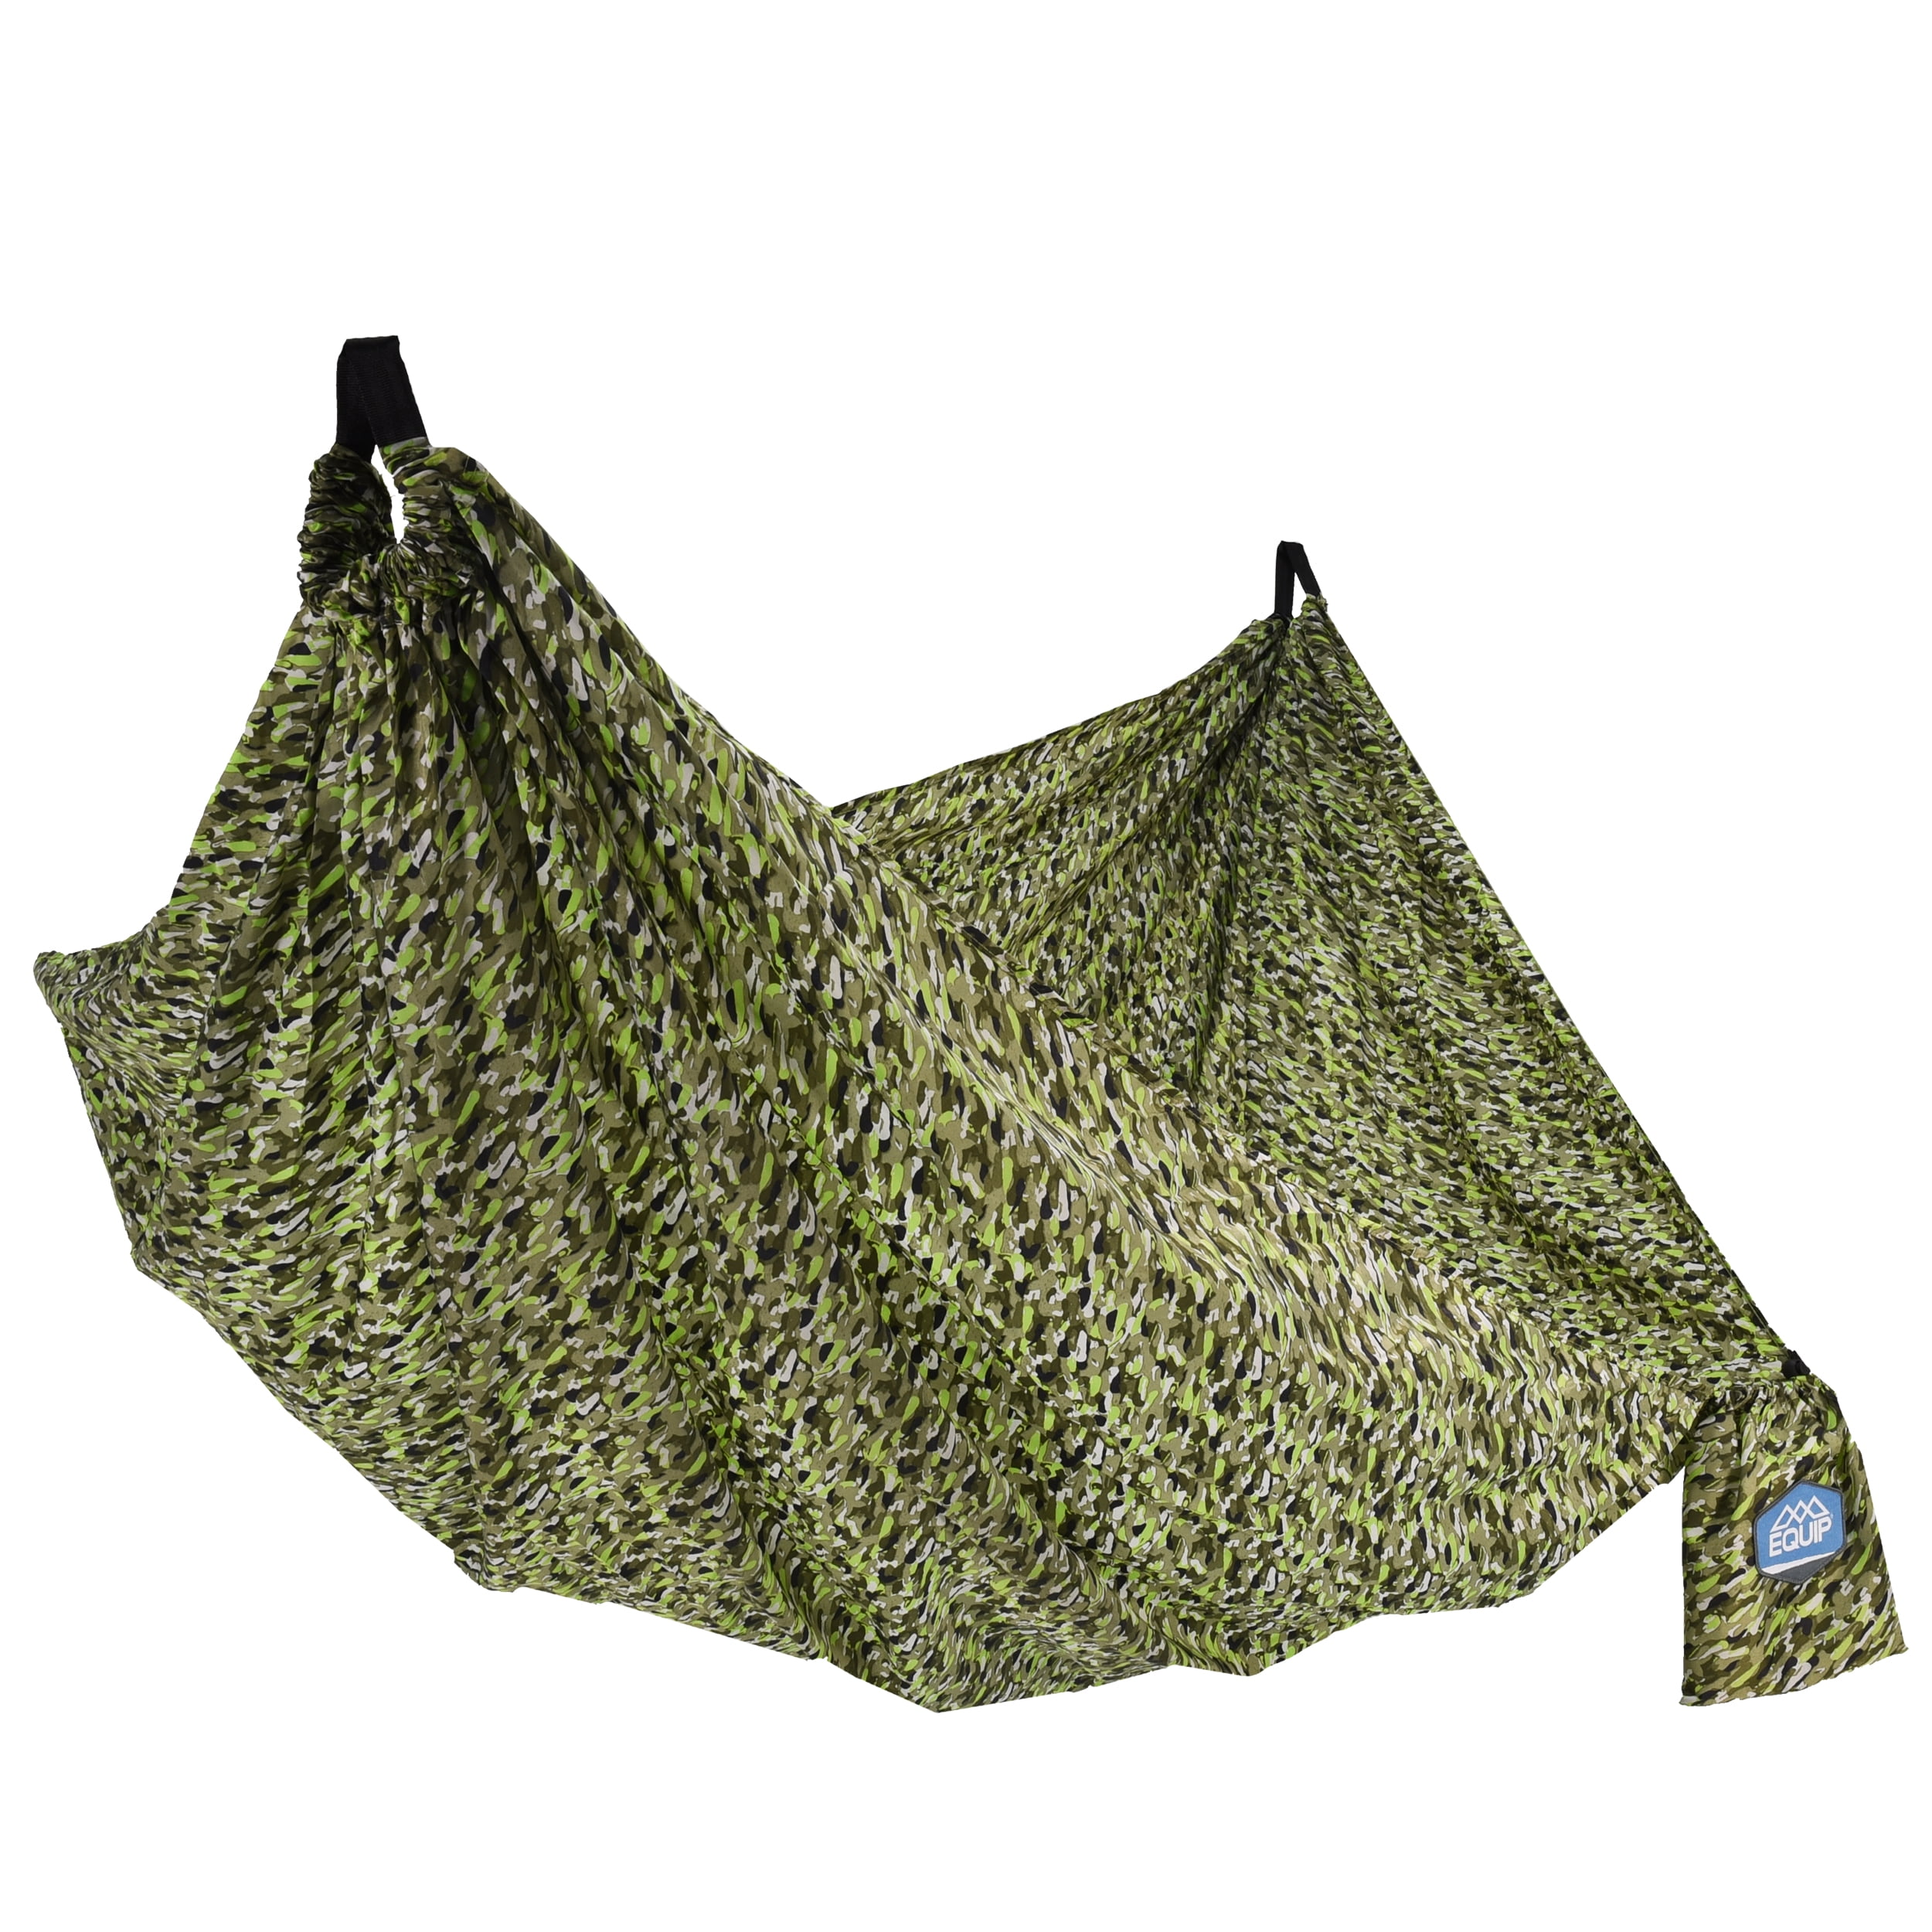 EQUIP Recycled Green Abstract Camo 1 Person Tree Hammock, Green,  Size 108" L x 56" W